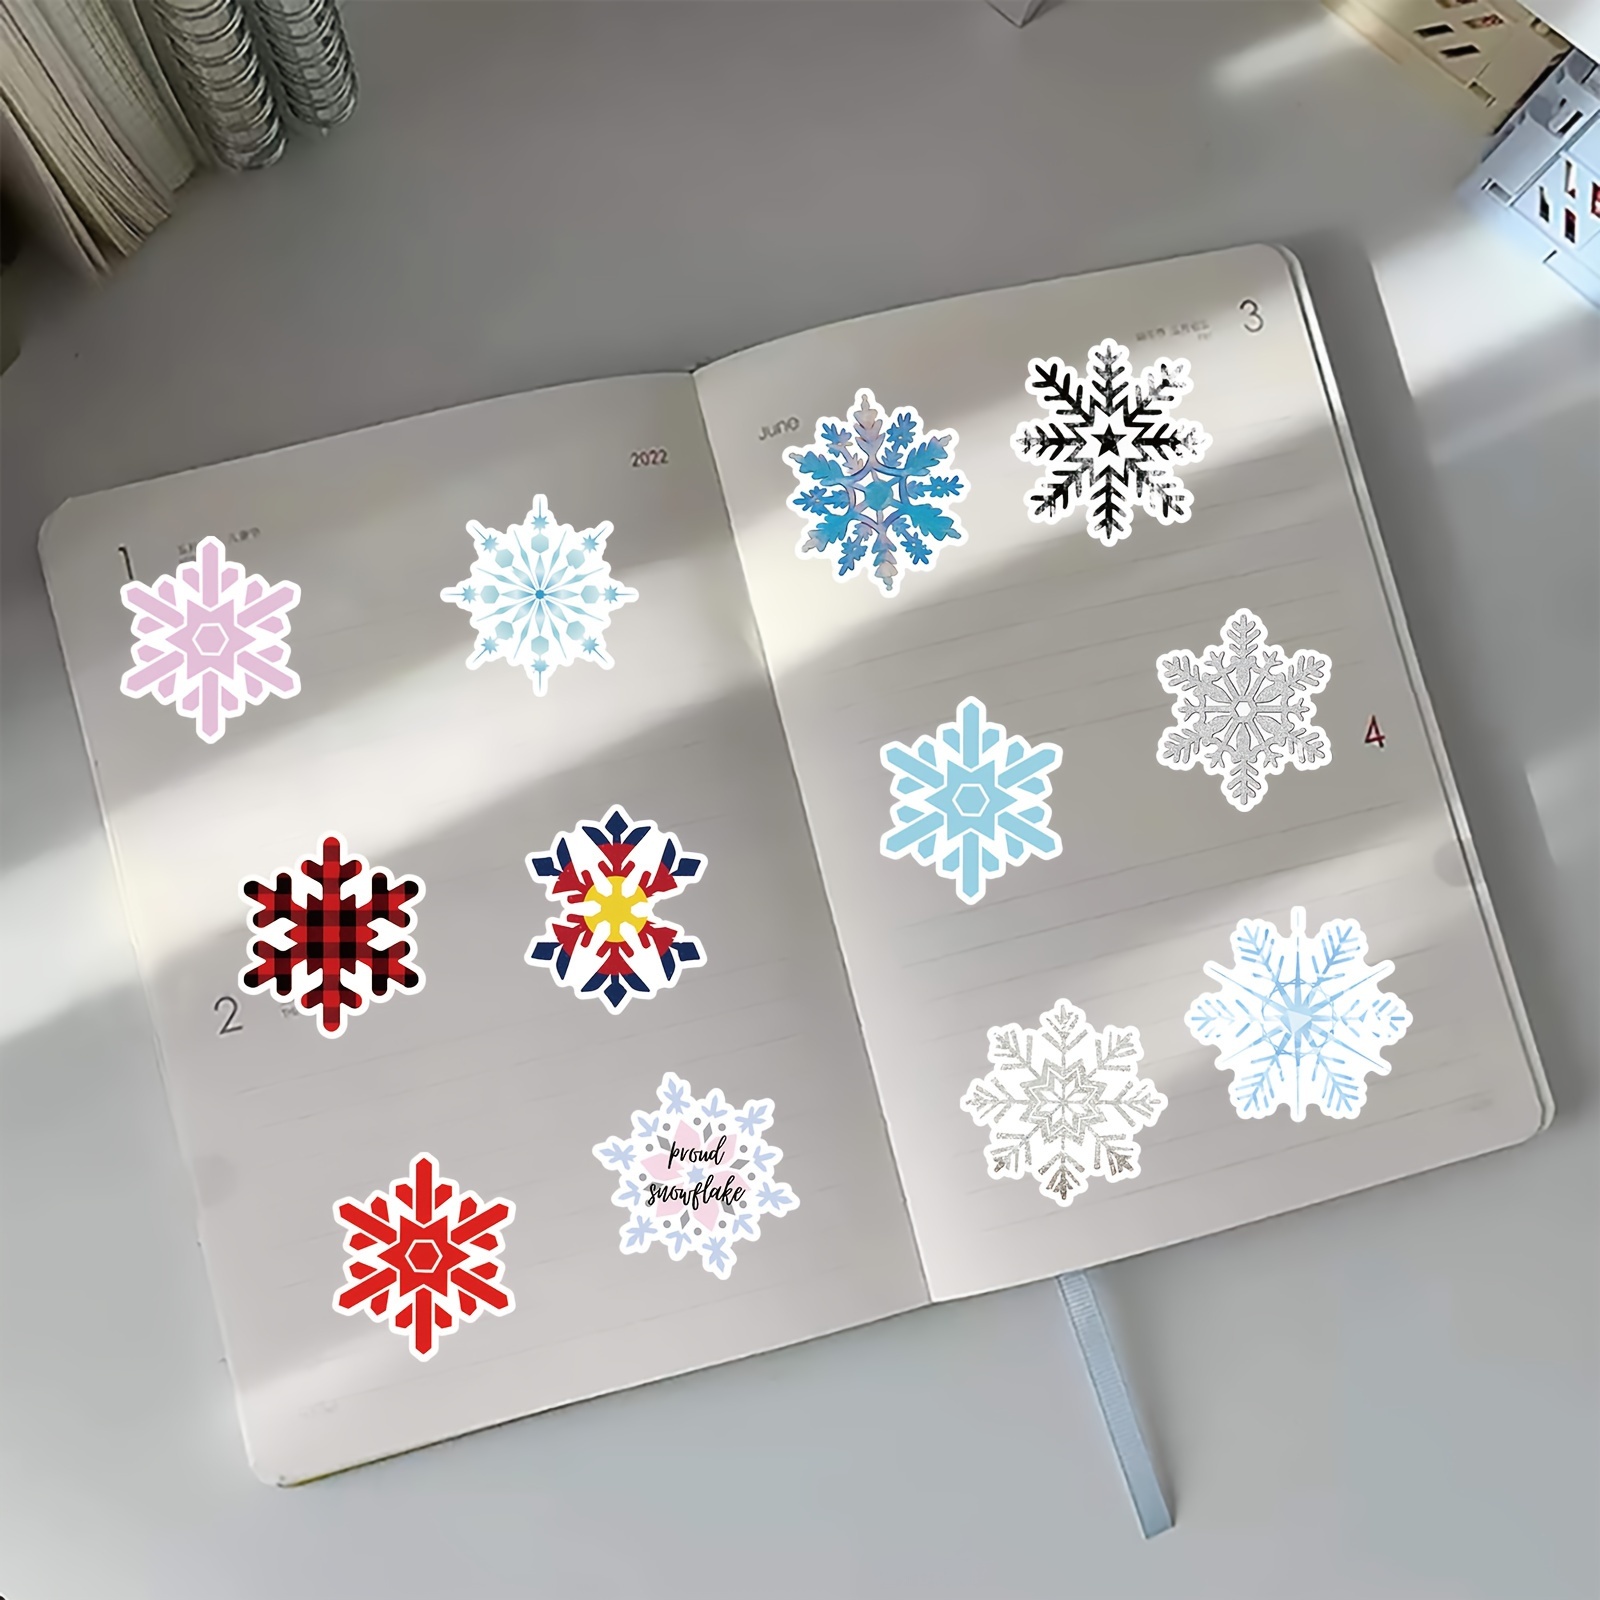  Aneco 500 Pieces Glitter Snowflakes Foam Stickers Self-Adhesive  Winter Snowflake Stickers for Christmas Party and DIY Craft Projects :  Arts, Crafts & Sewing